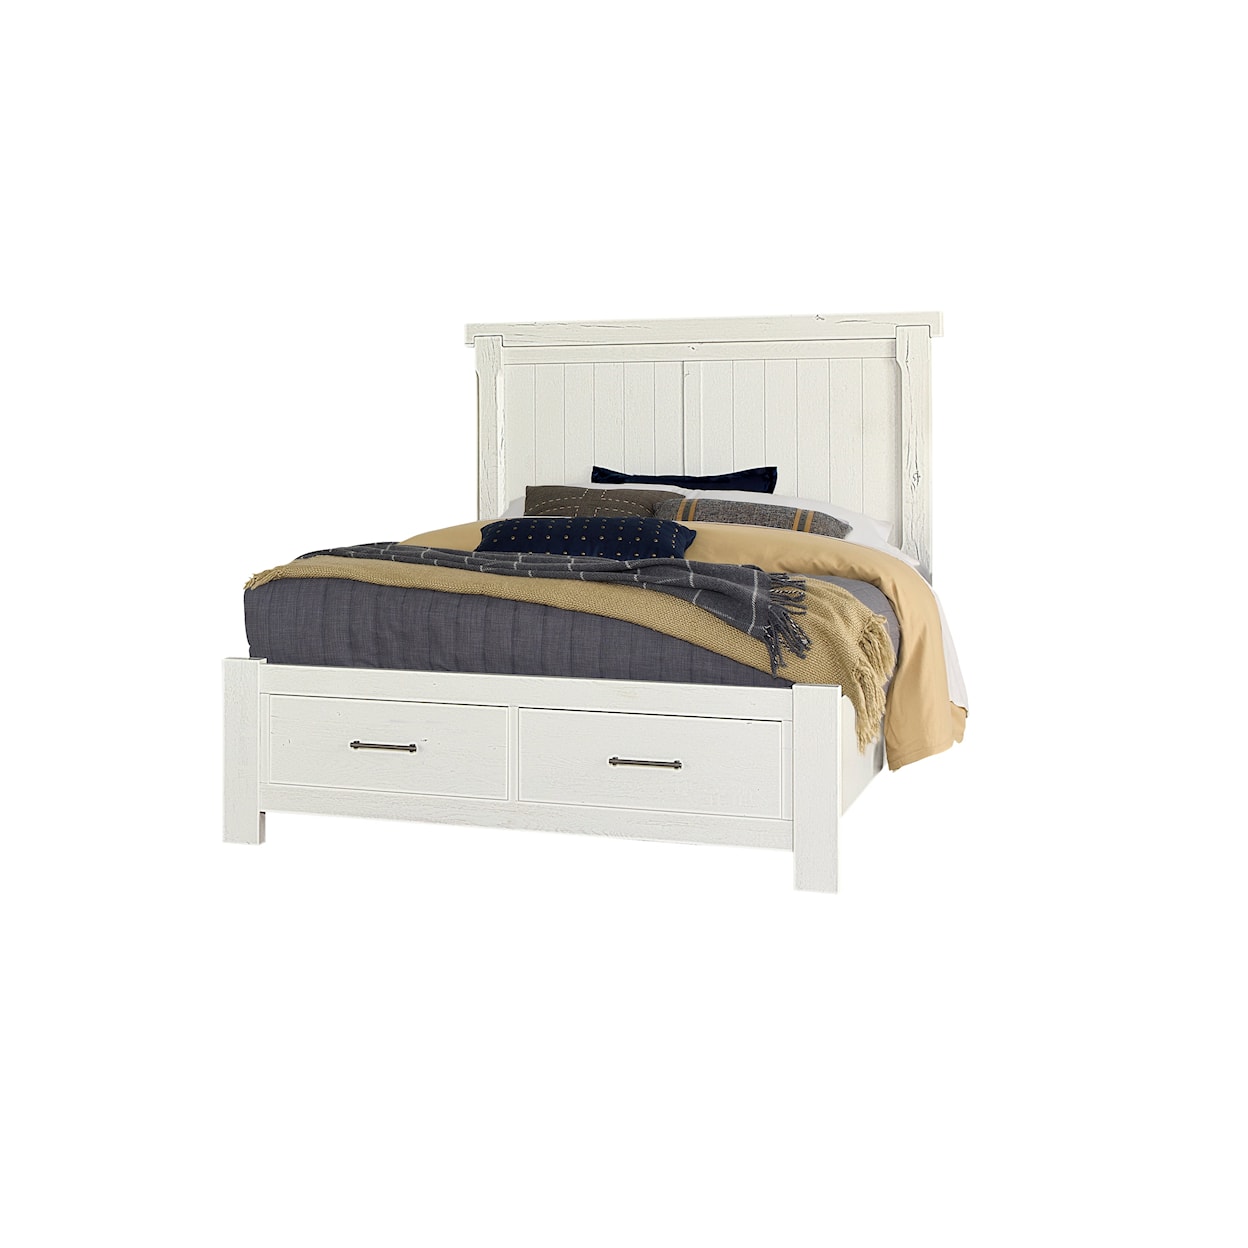 Carolina Bedroom Yellowstone Queen Dovetail Storage Bed